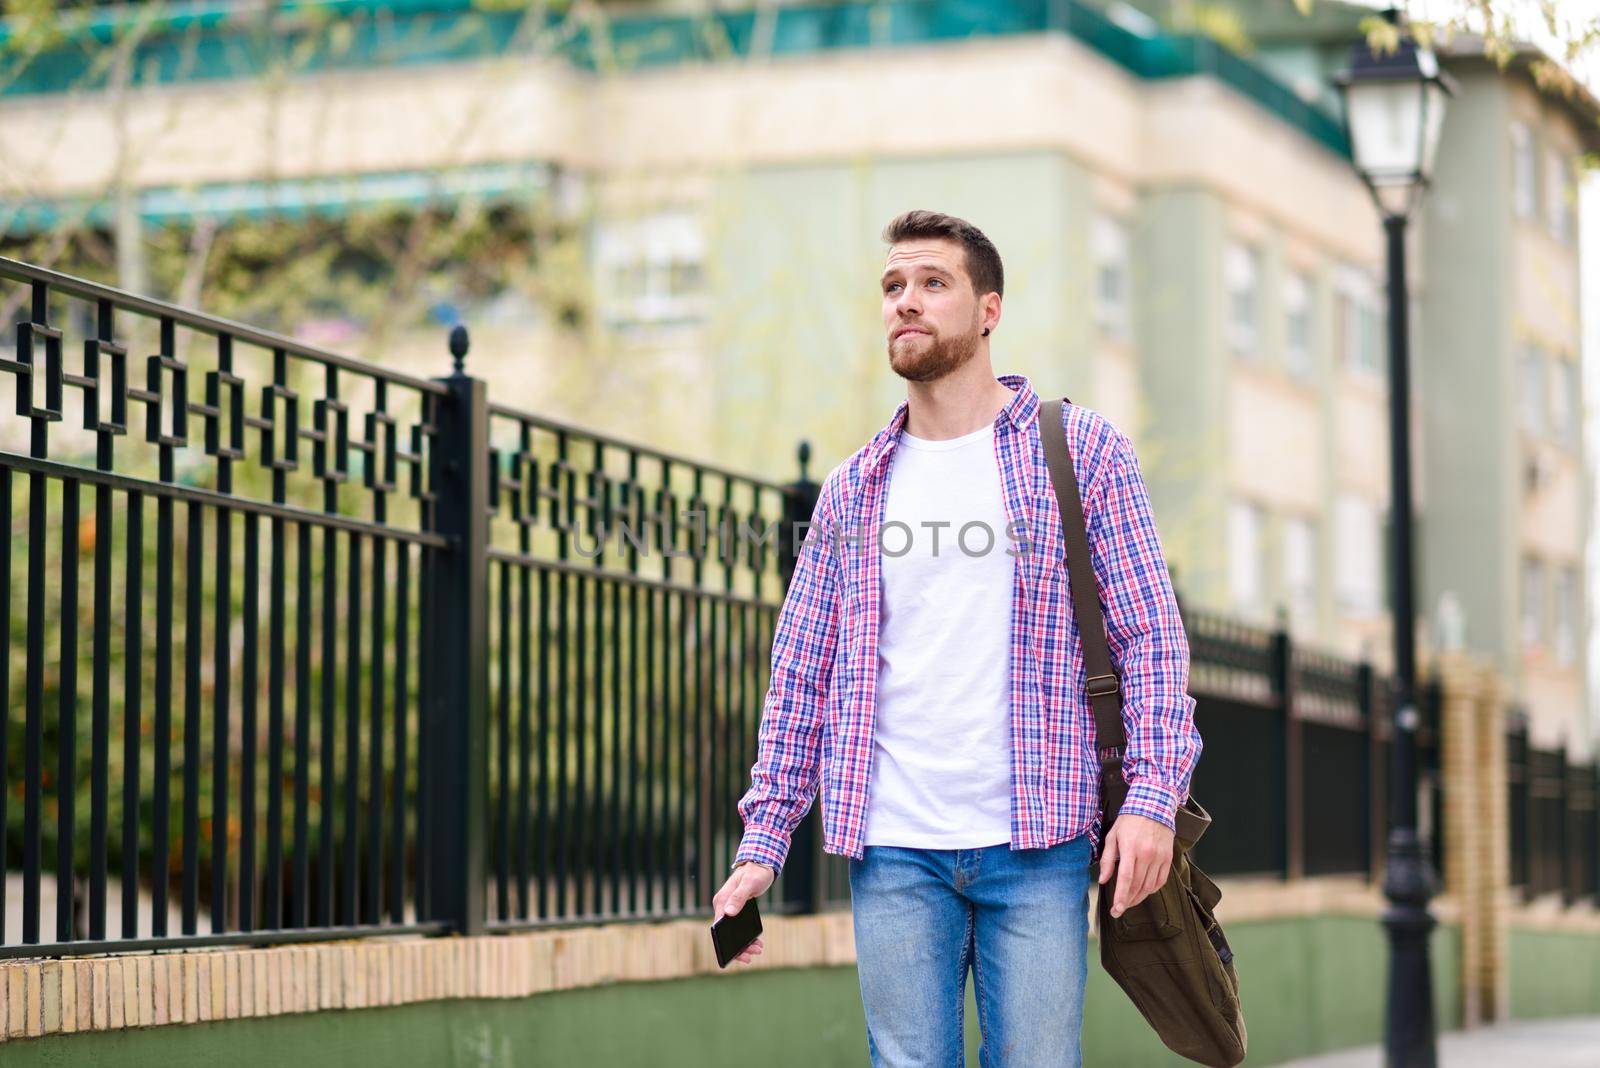 Young bearded man walking in urban background. Traveler wearing casual clothes. Lifestyle concept.